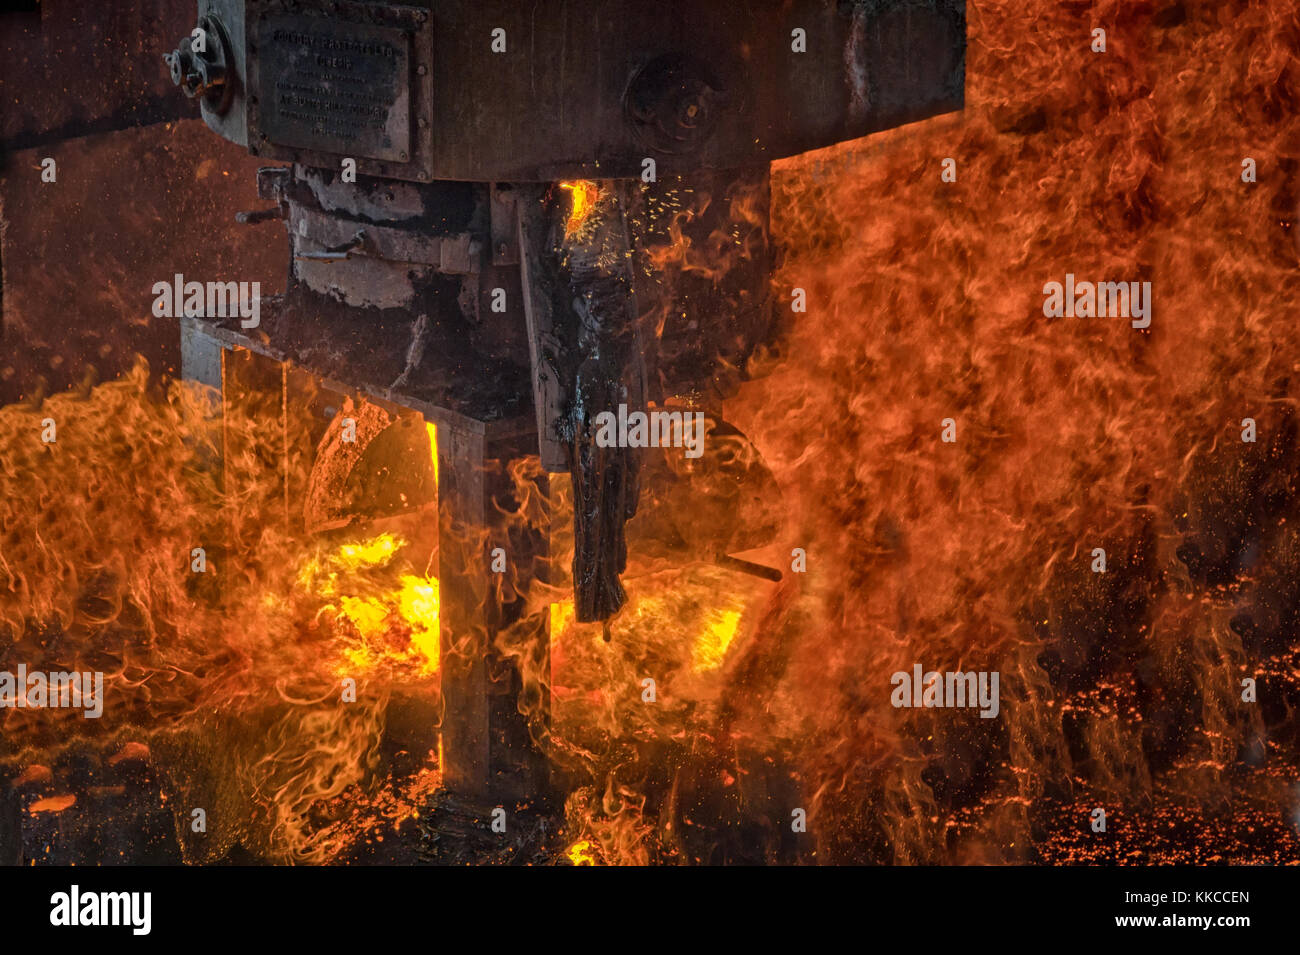 An close view of an industrial furnace being emptied with fire and flames predominant Stock Photo